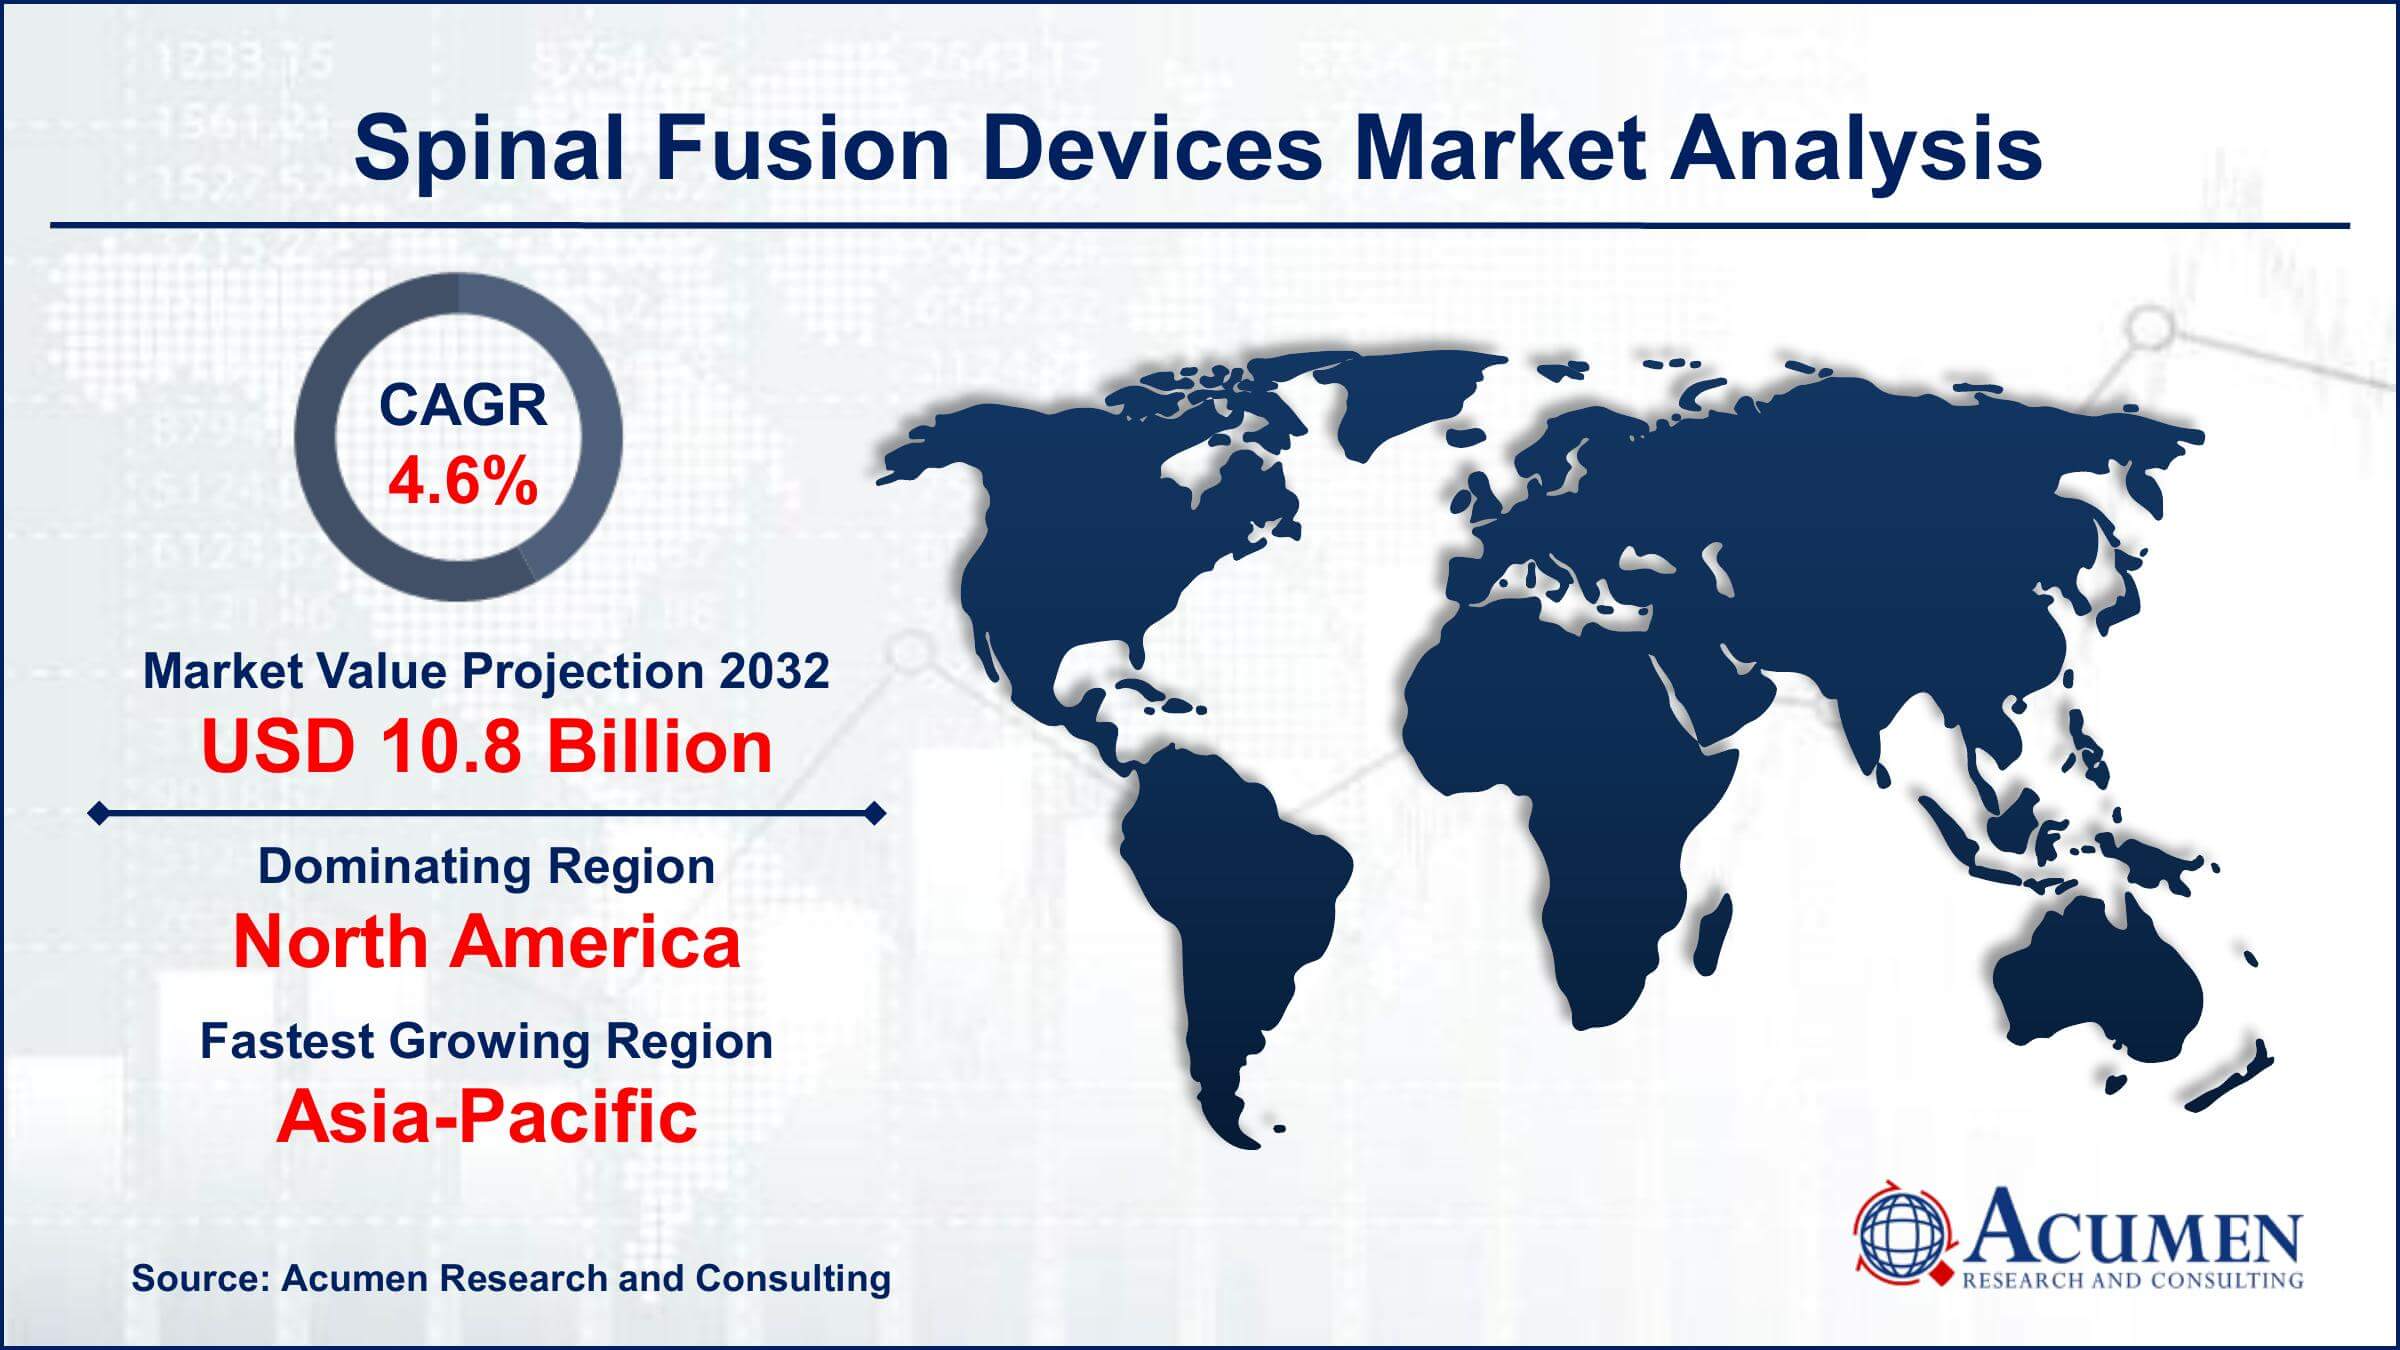 Global Spinal Fusion Devices Market Trends